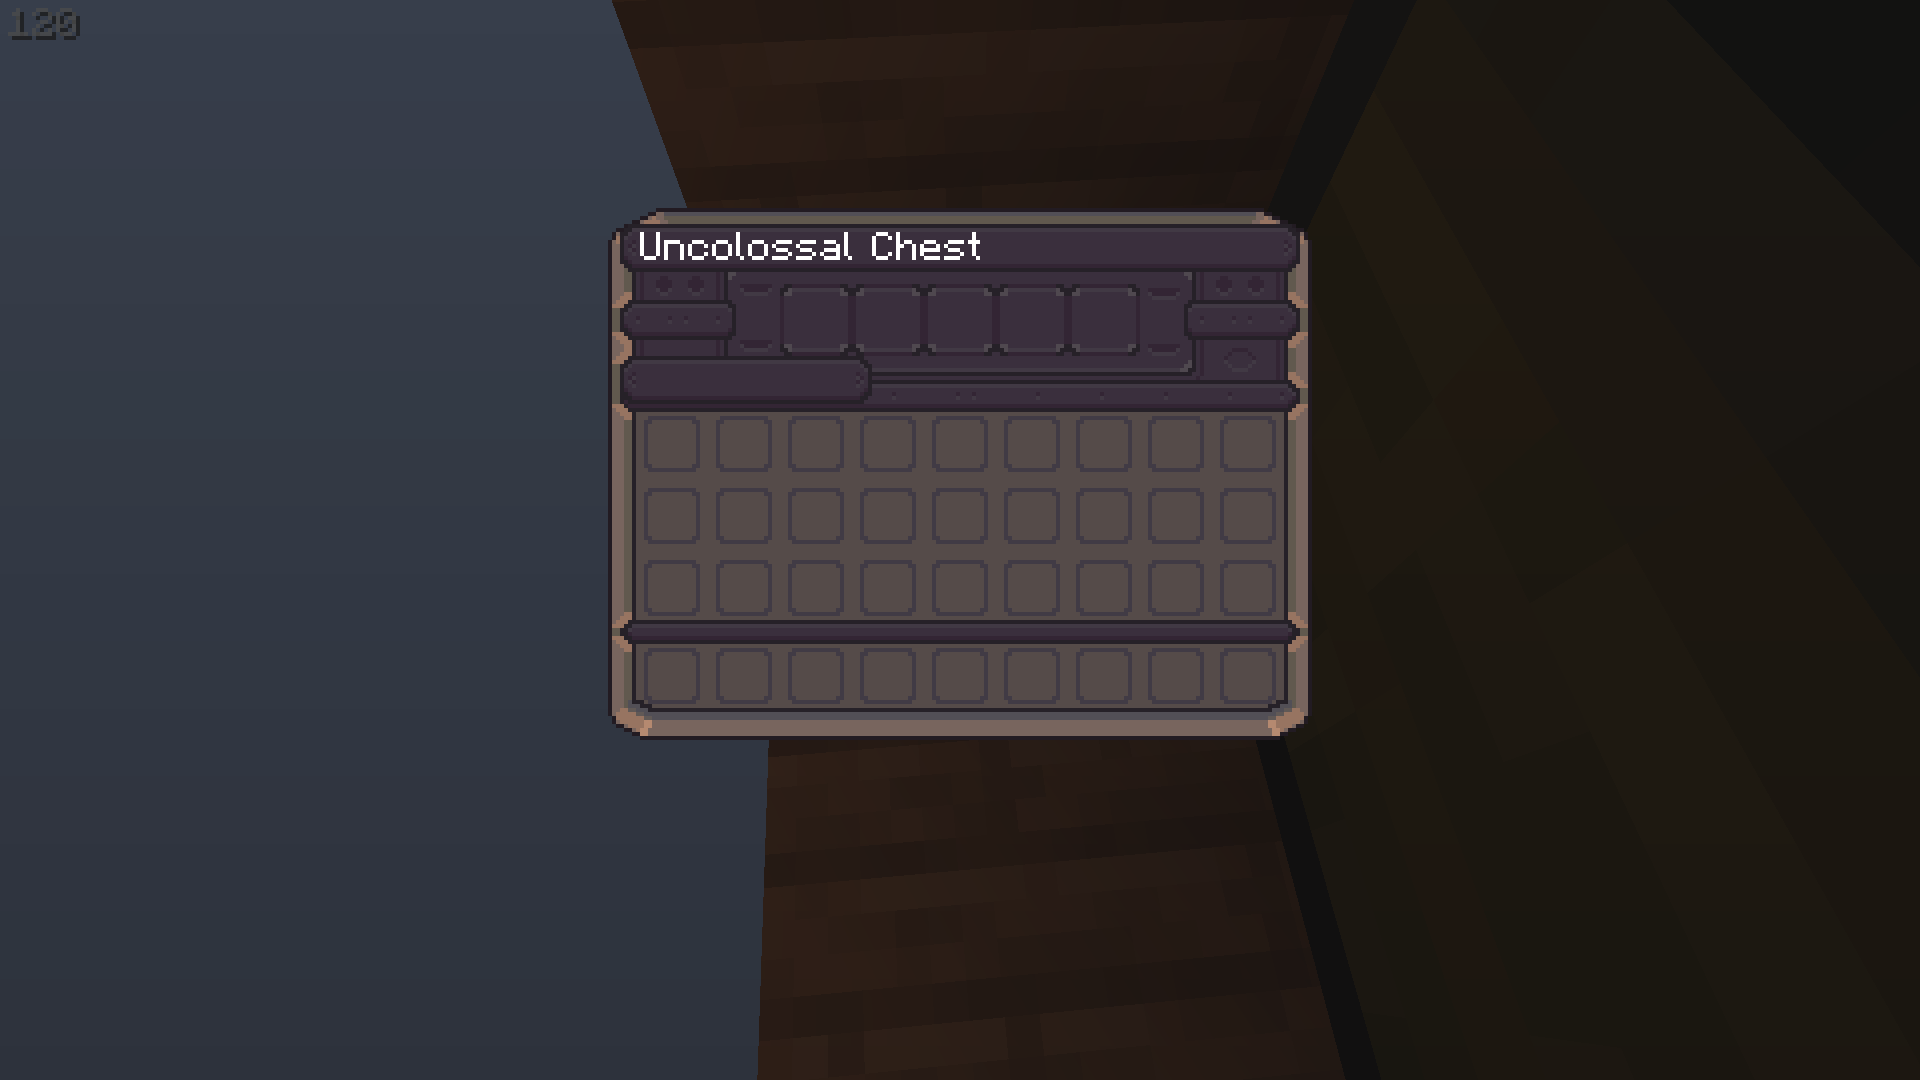 Uncolossal Chest